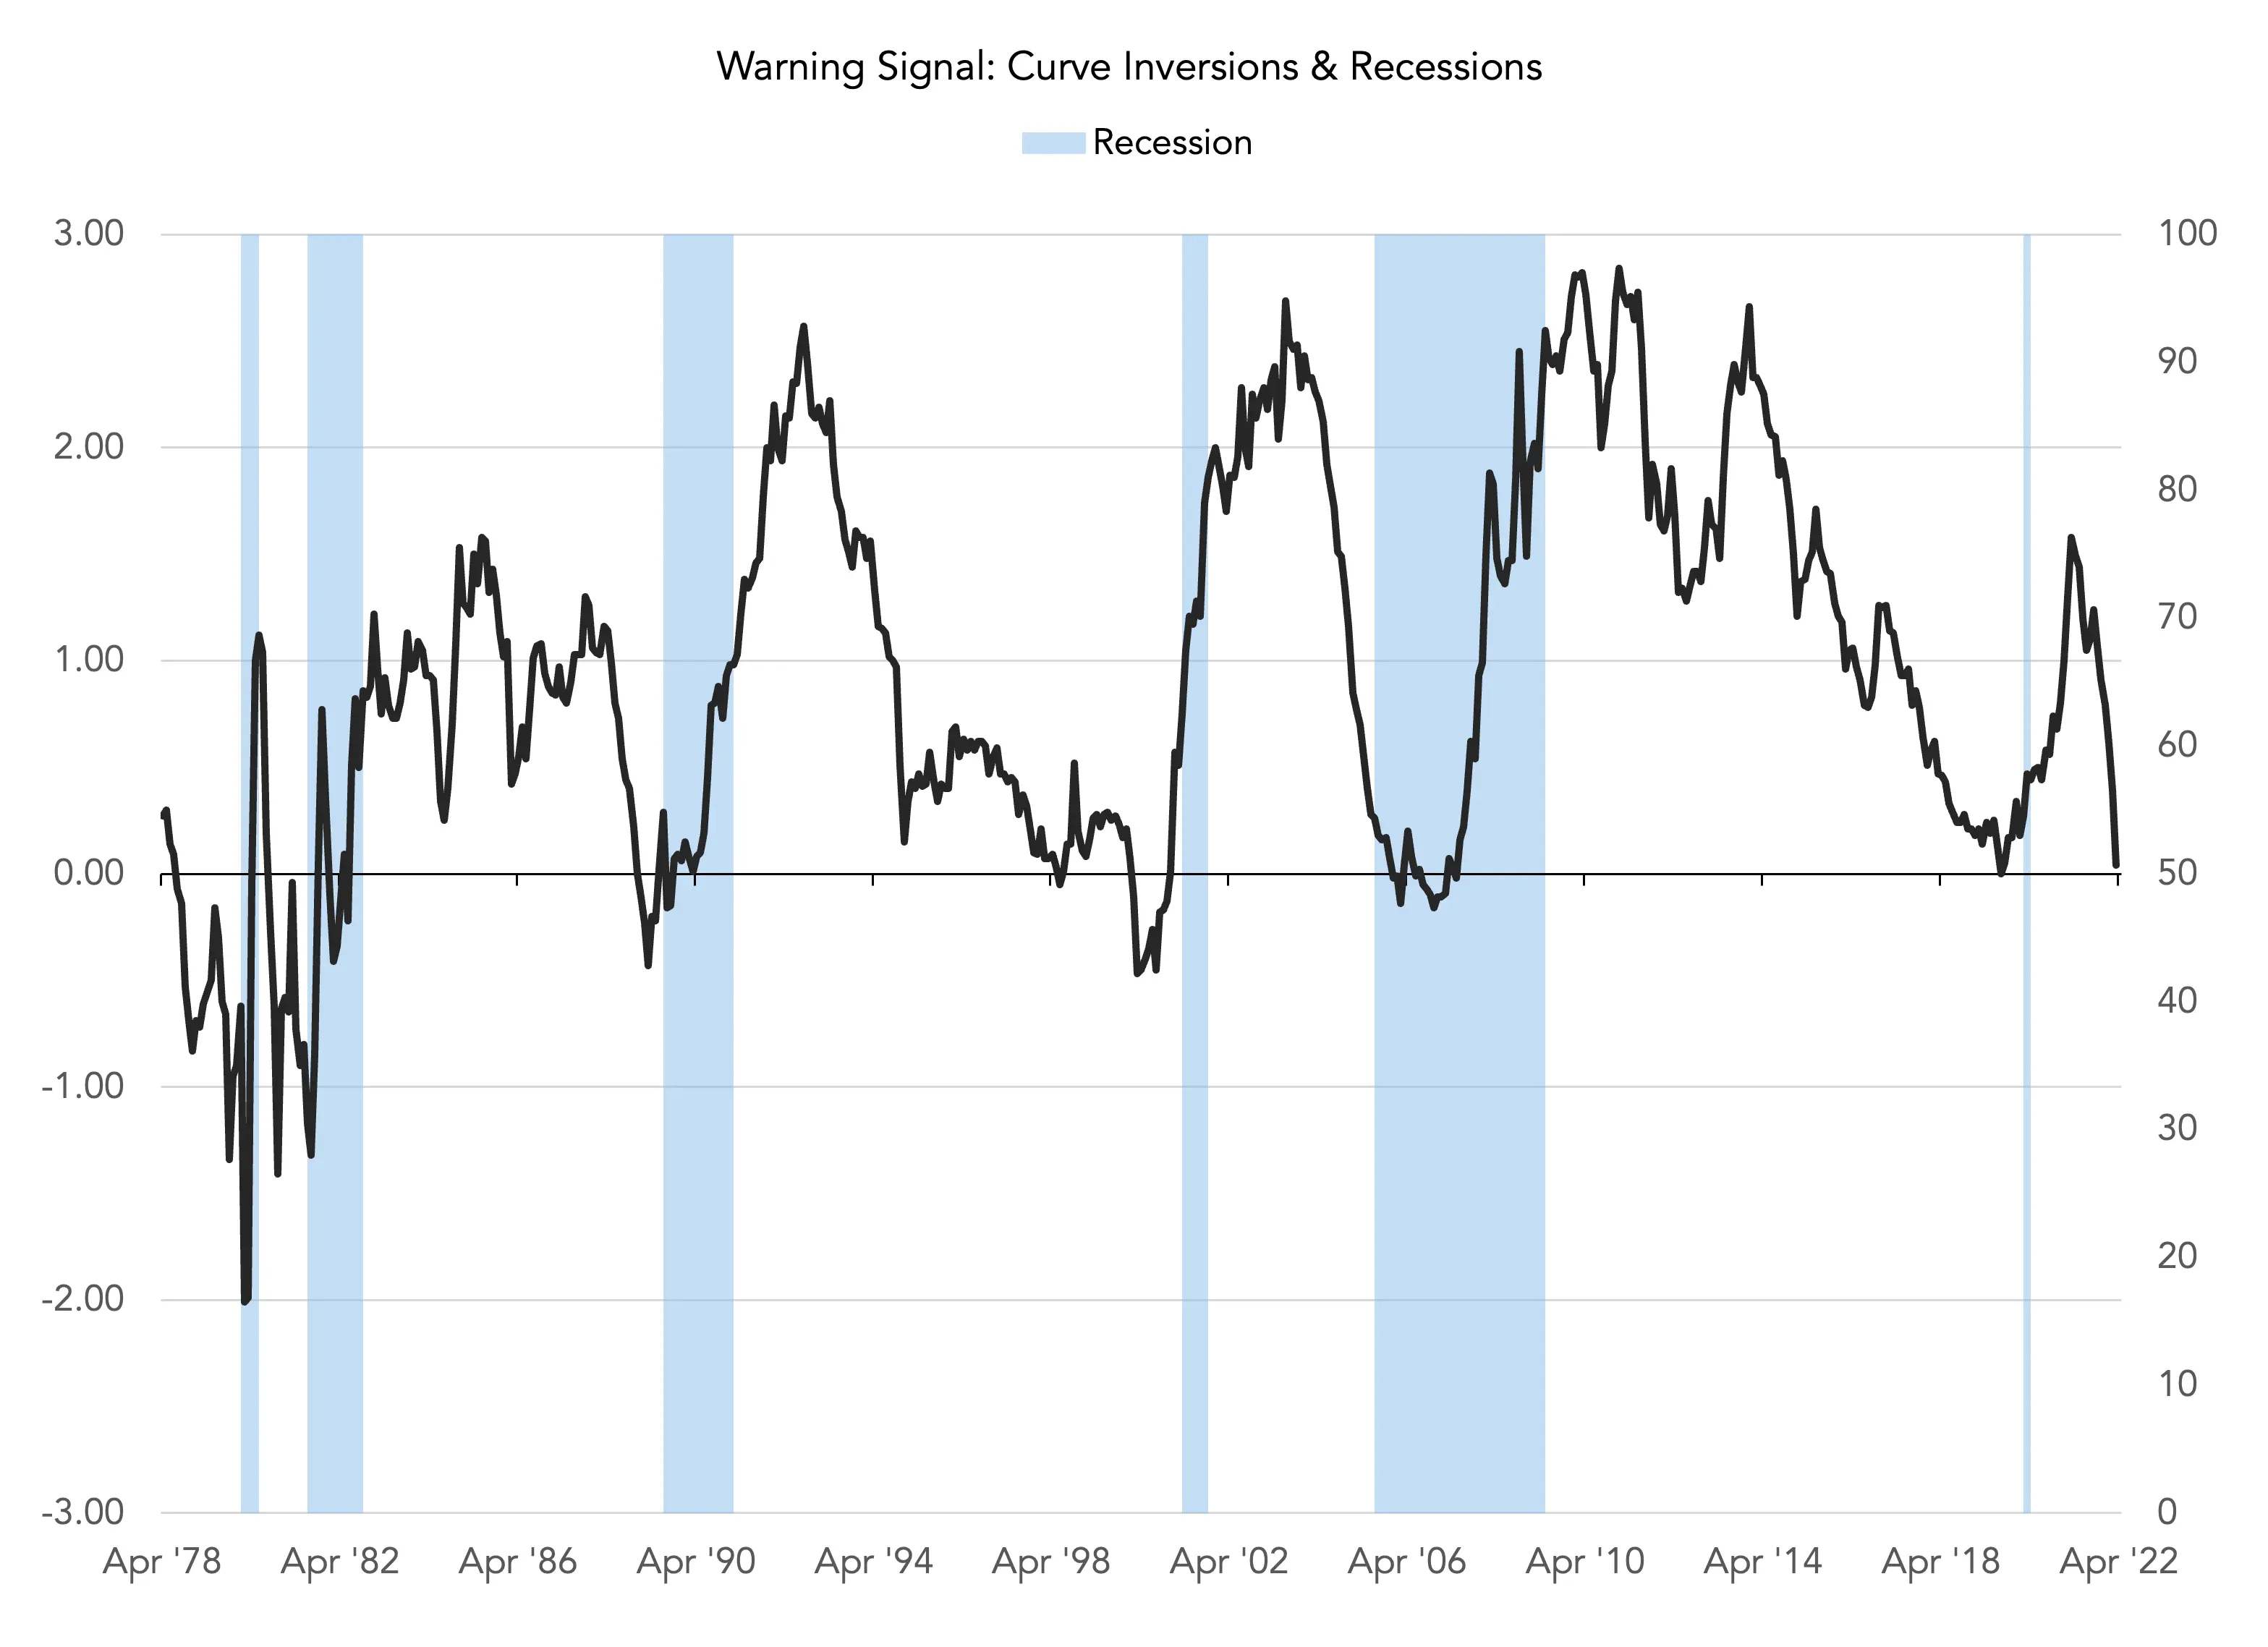 Since 1955 every US recession has been preceded by a protracted yield curve inversion with only one significant false signal.